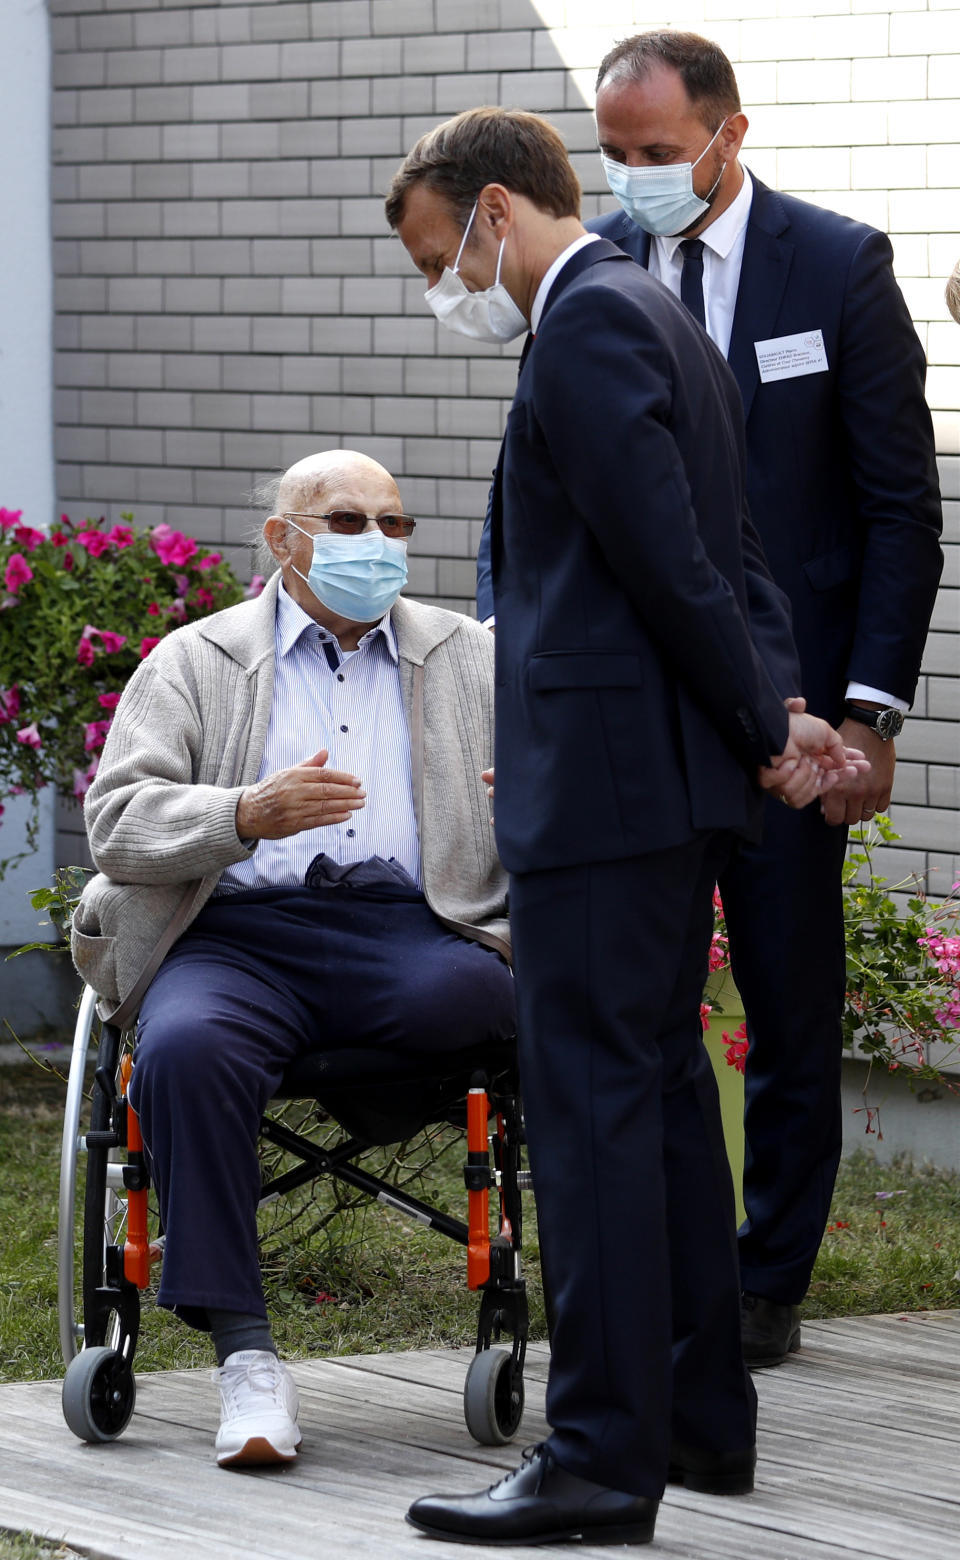 French President Emmanuel Macron, right, talks to a resident at the 'La Bonne Eure' nursing home in Bracieux, central France, Tuesday, Sept. 22, 2020. For the first time in months, virus infections and deaths in French nursing homes are on the rise again. (Yoan Valat/Pool Photo via AP)